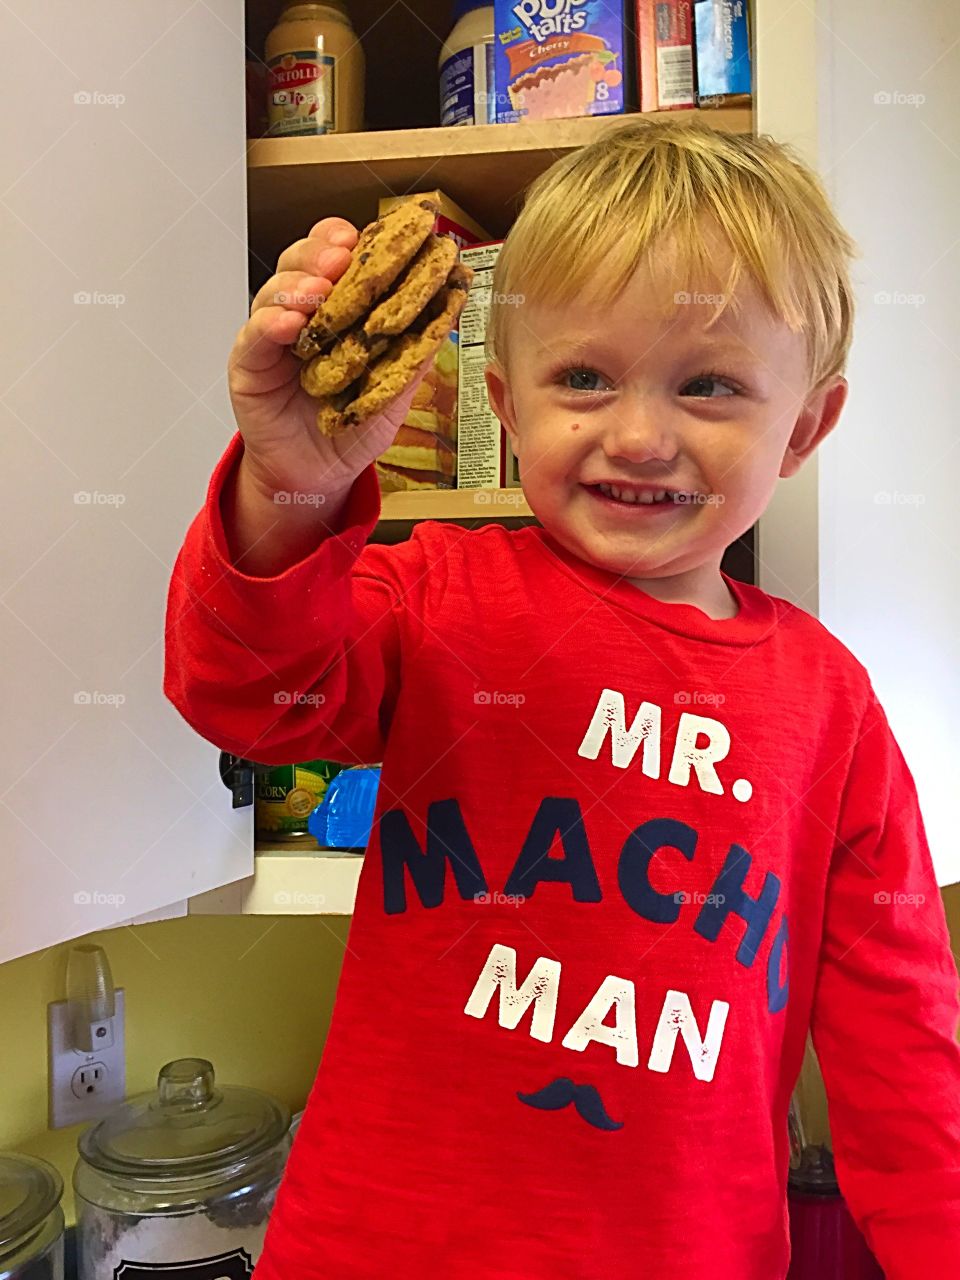 Small kid holding cookies in hand